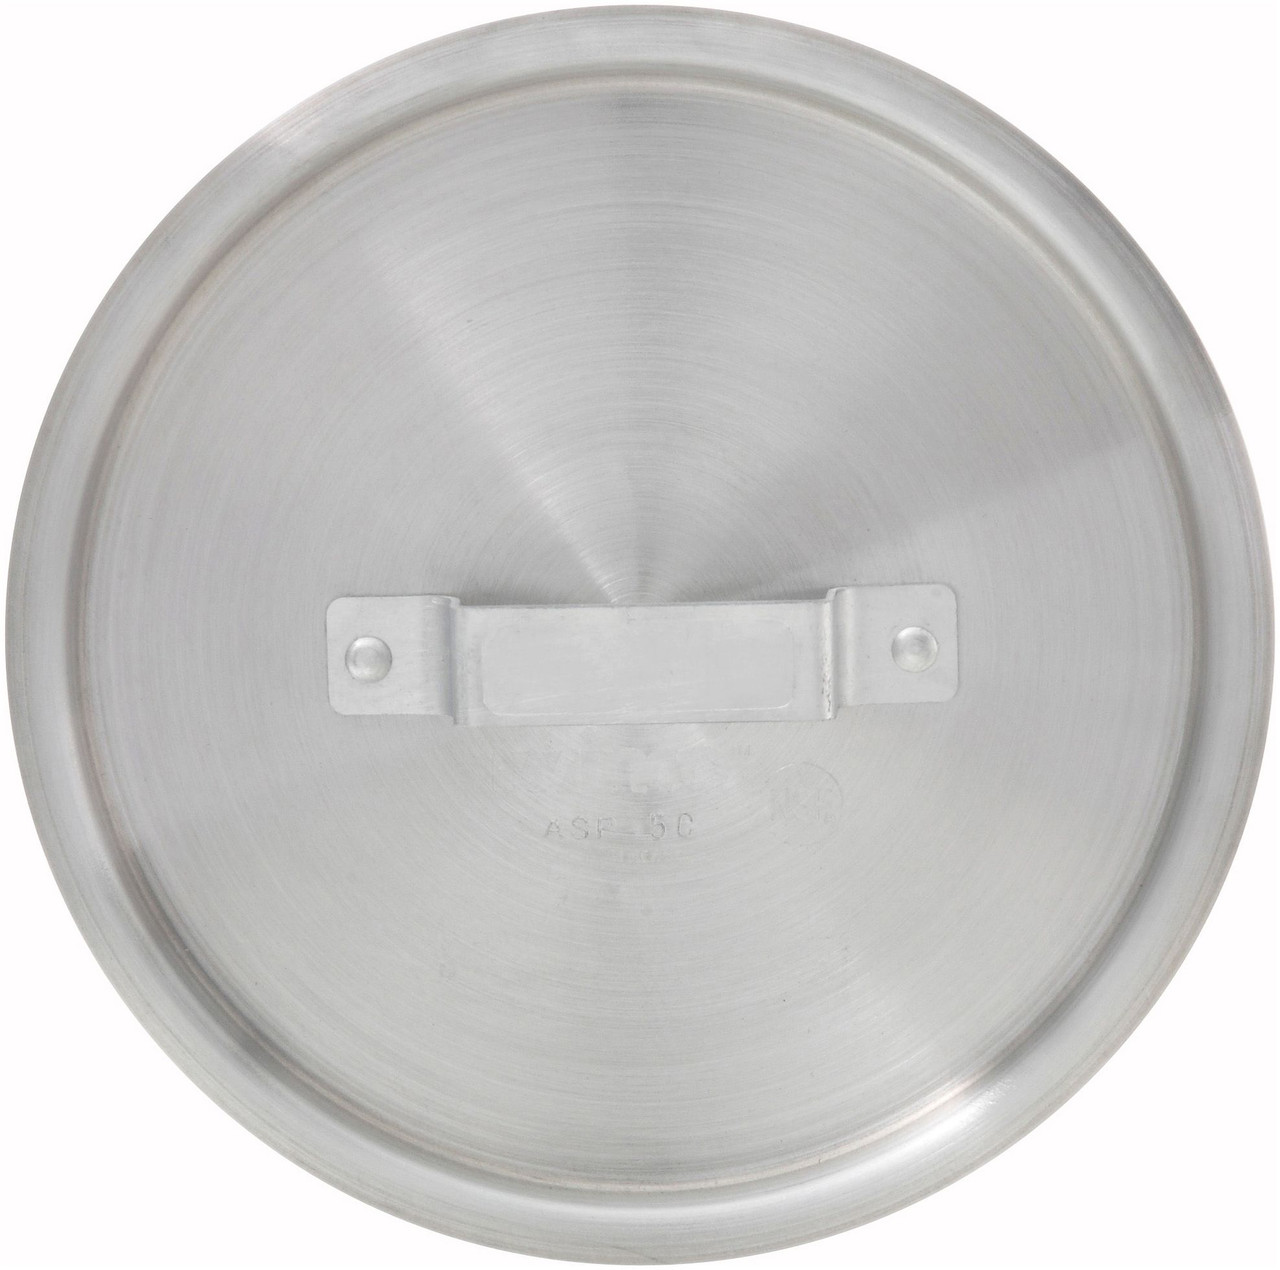 Winco ASP-4C Cover for 4 1/2 Qt. Sauce Pan